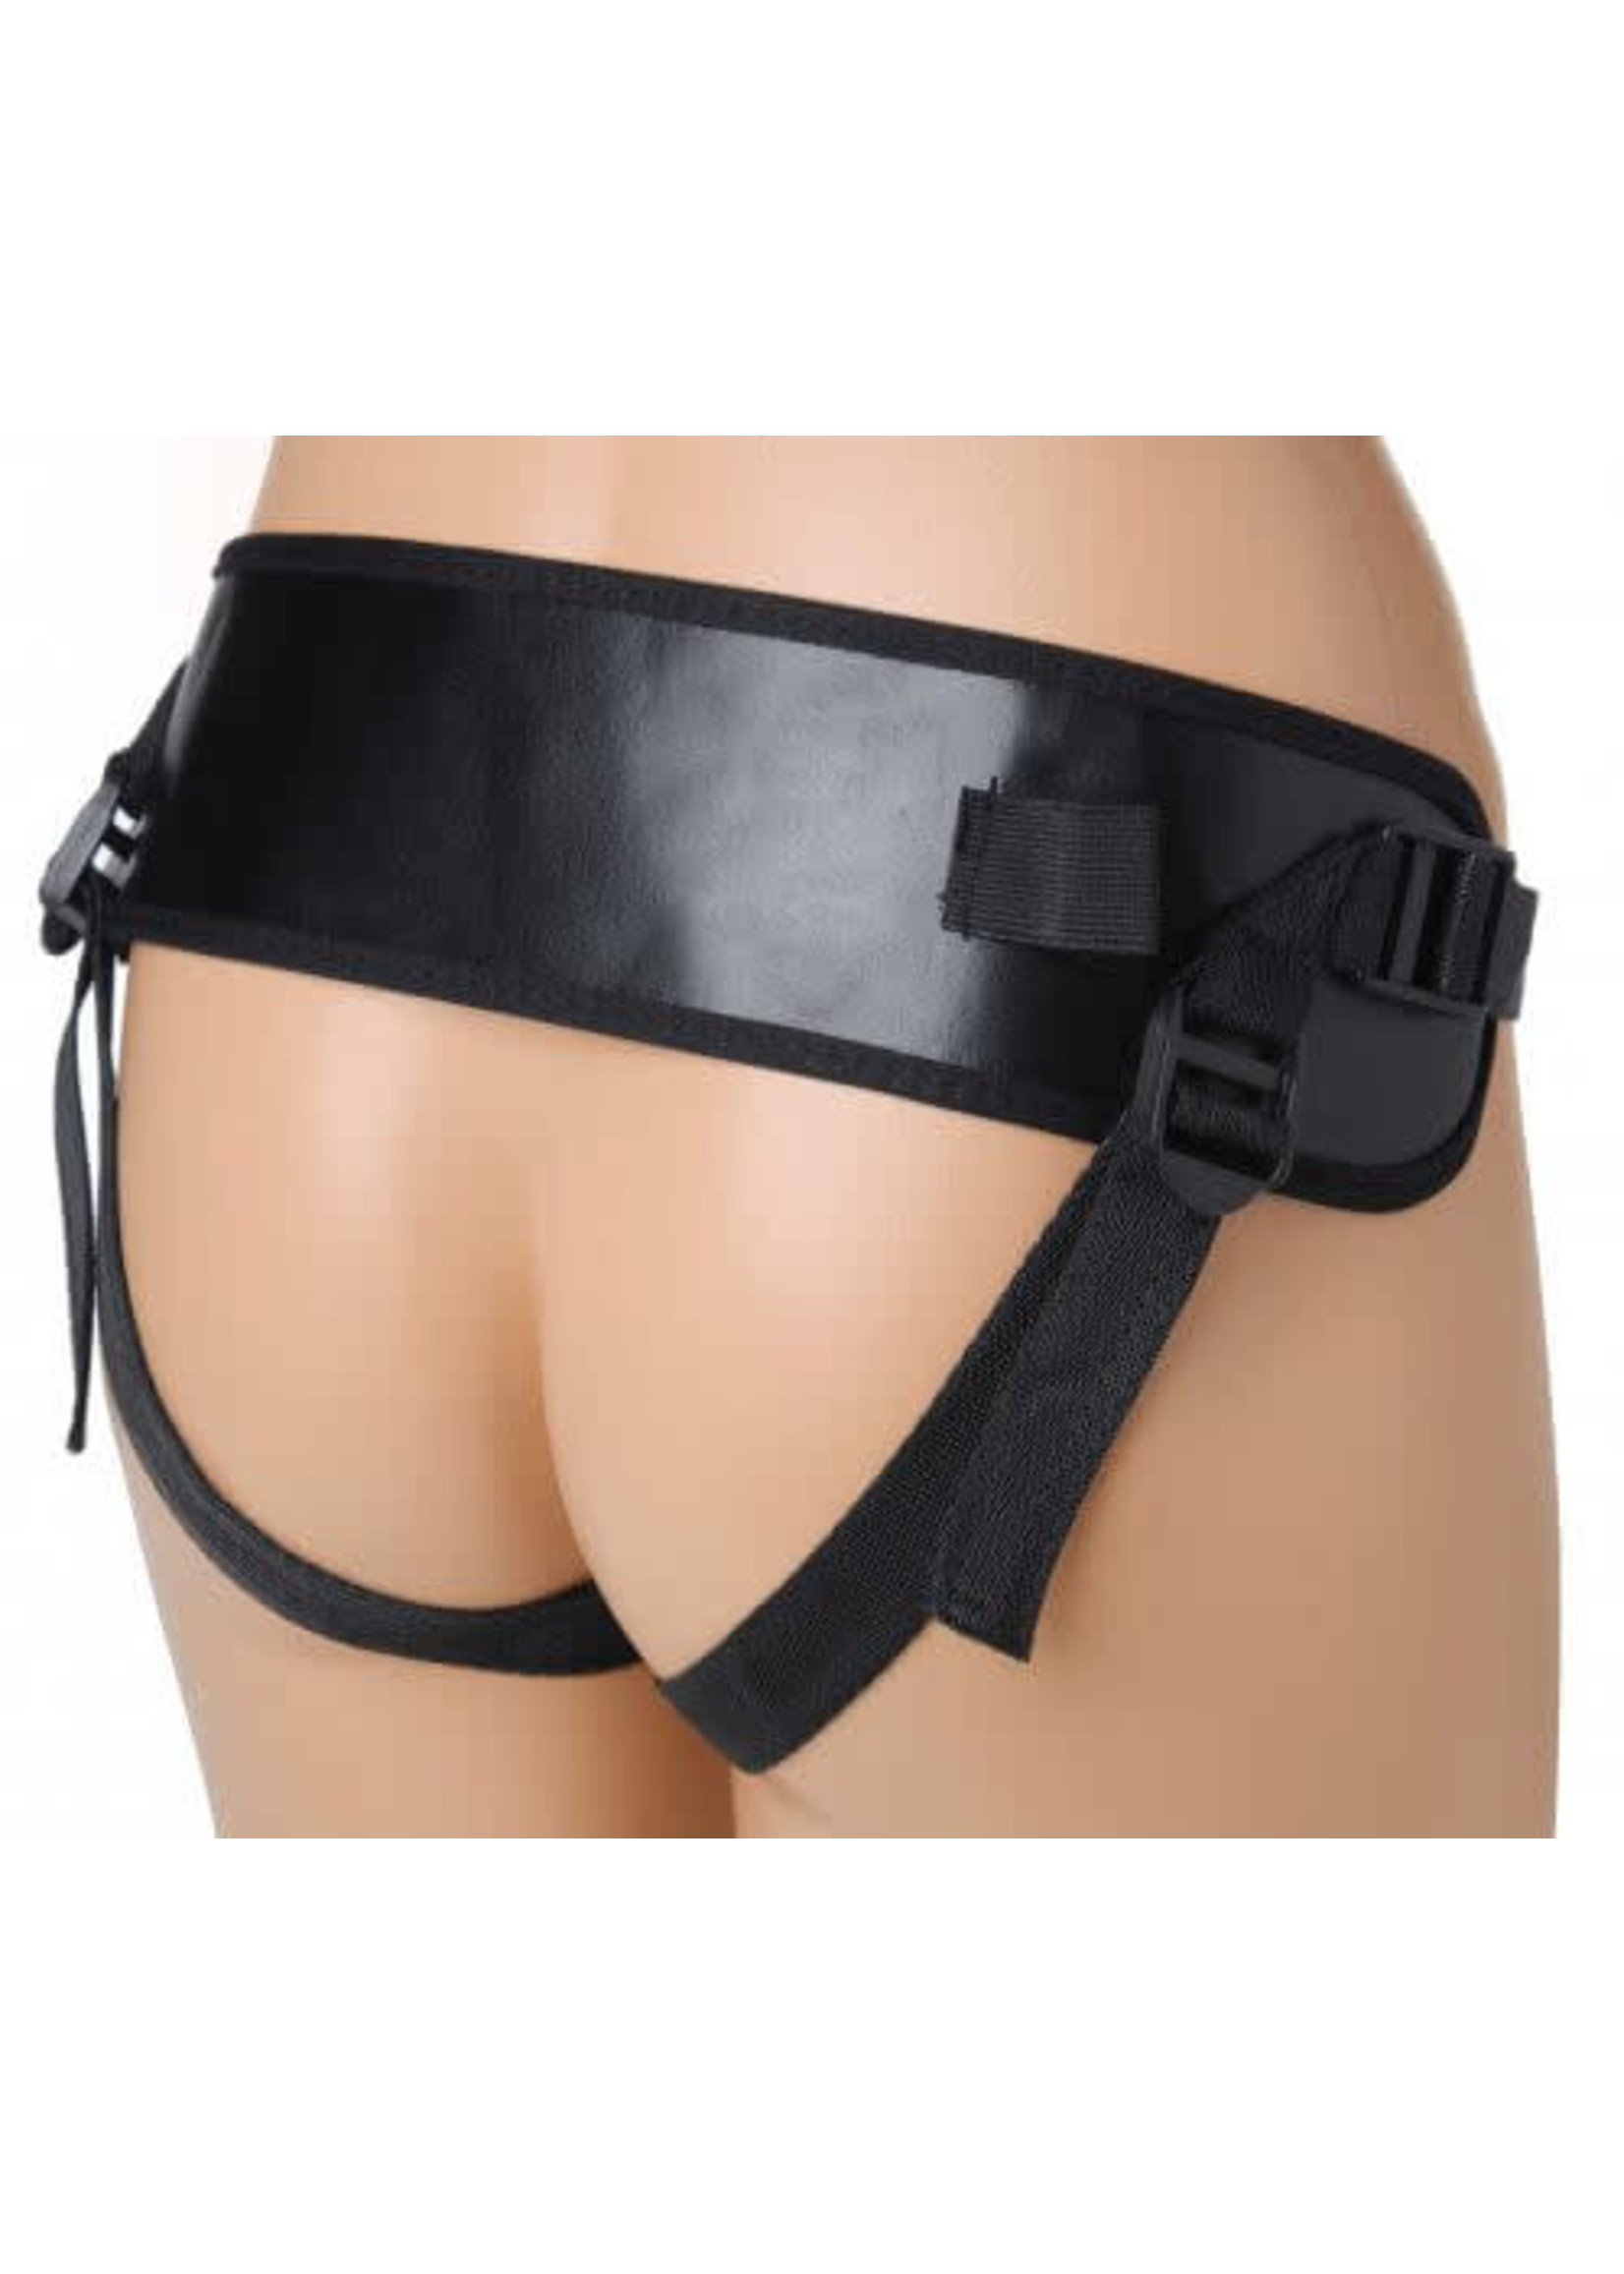 Strap U Siren Universal Strap On Harness with Rear Support